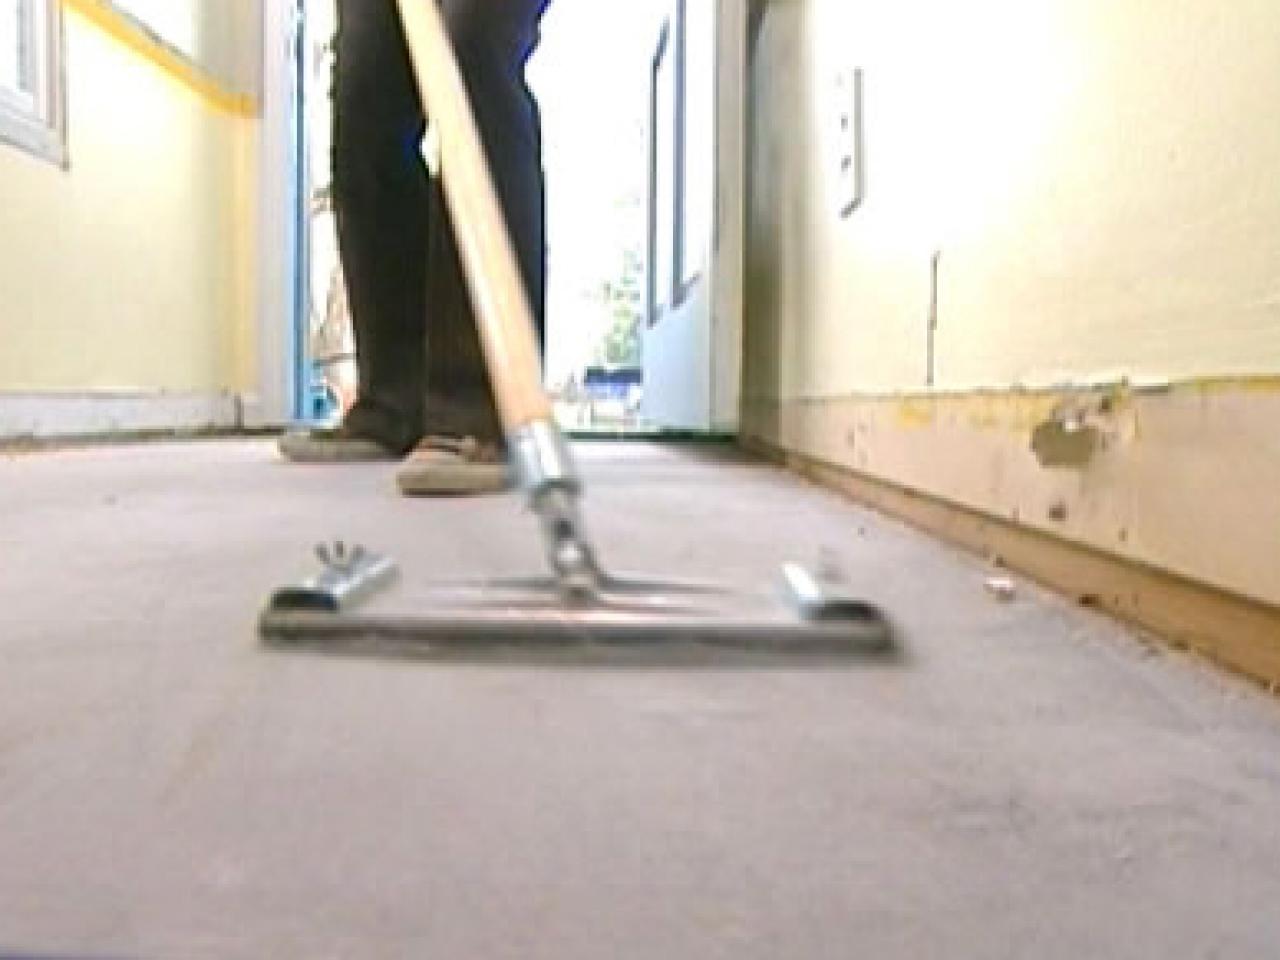 How To Install Linoleum Flooring How Tos Diy,Roasted Chicken Pieces And Vegetables